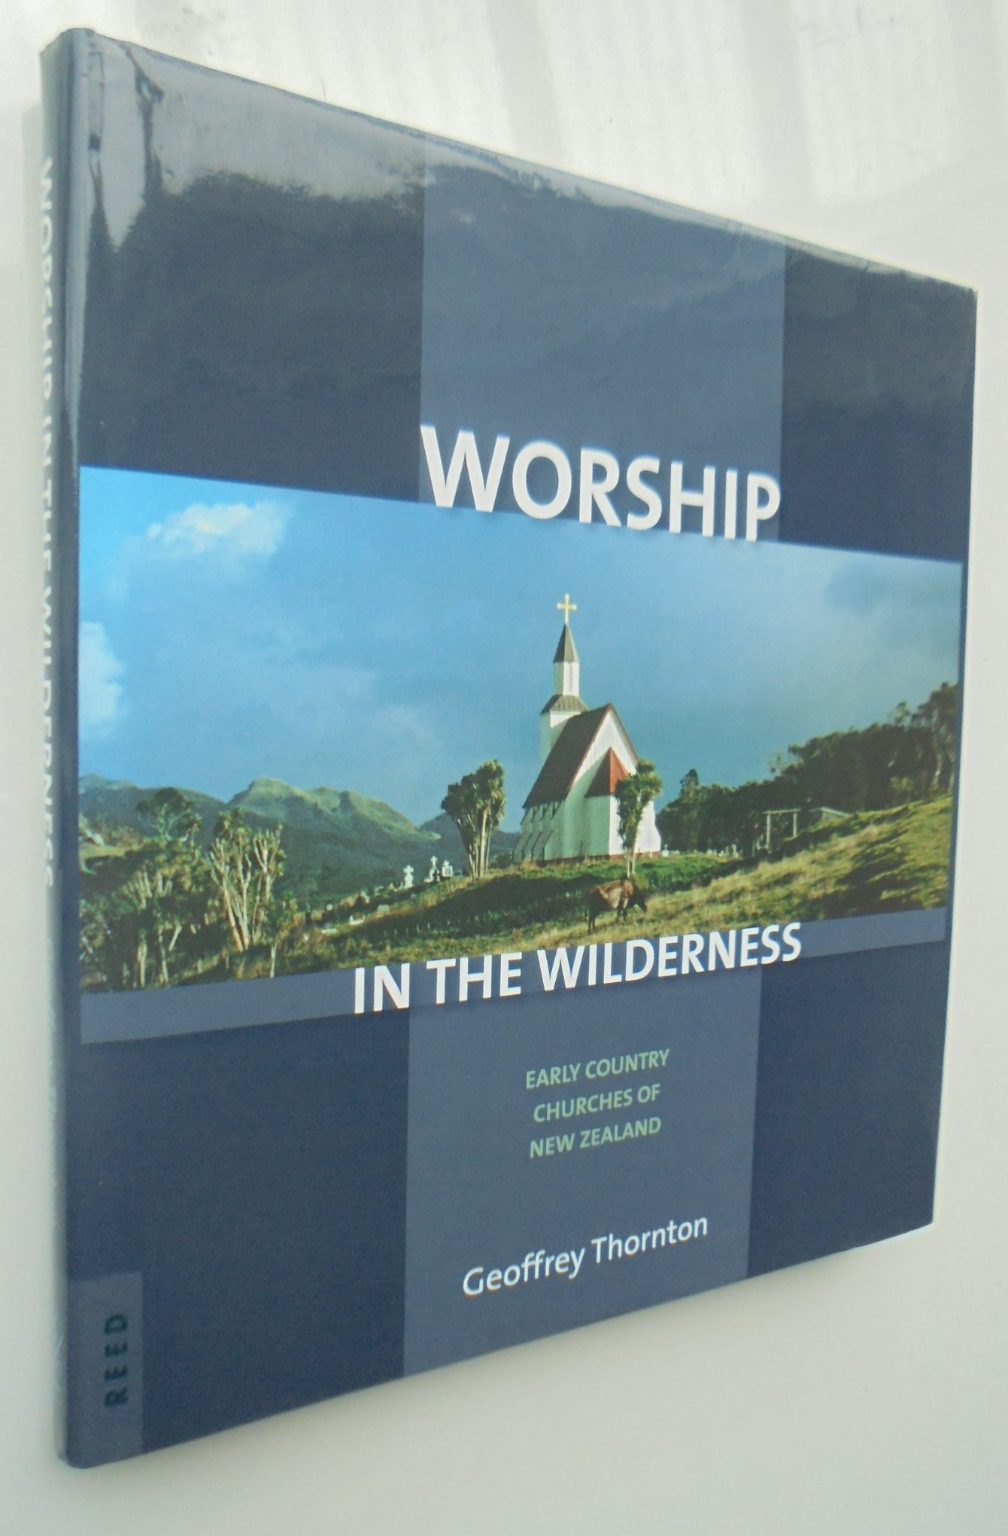 Worship in the Wilderness Early Country Churches of New Zealand by Geoffrey Thornton.